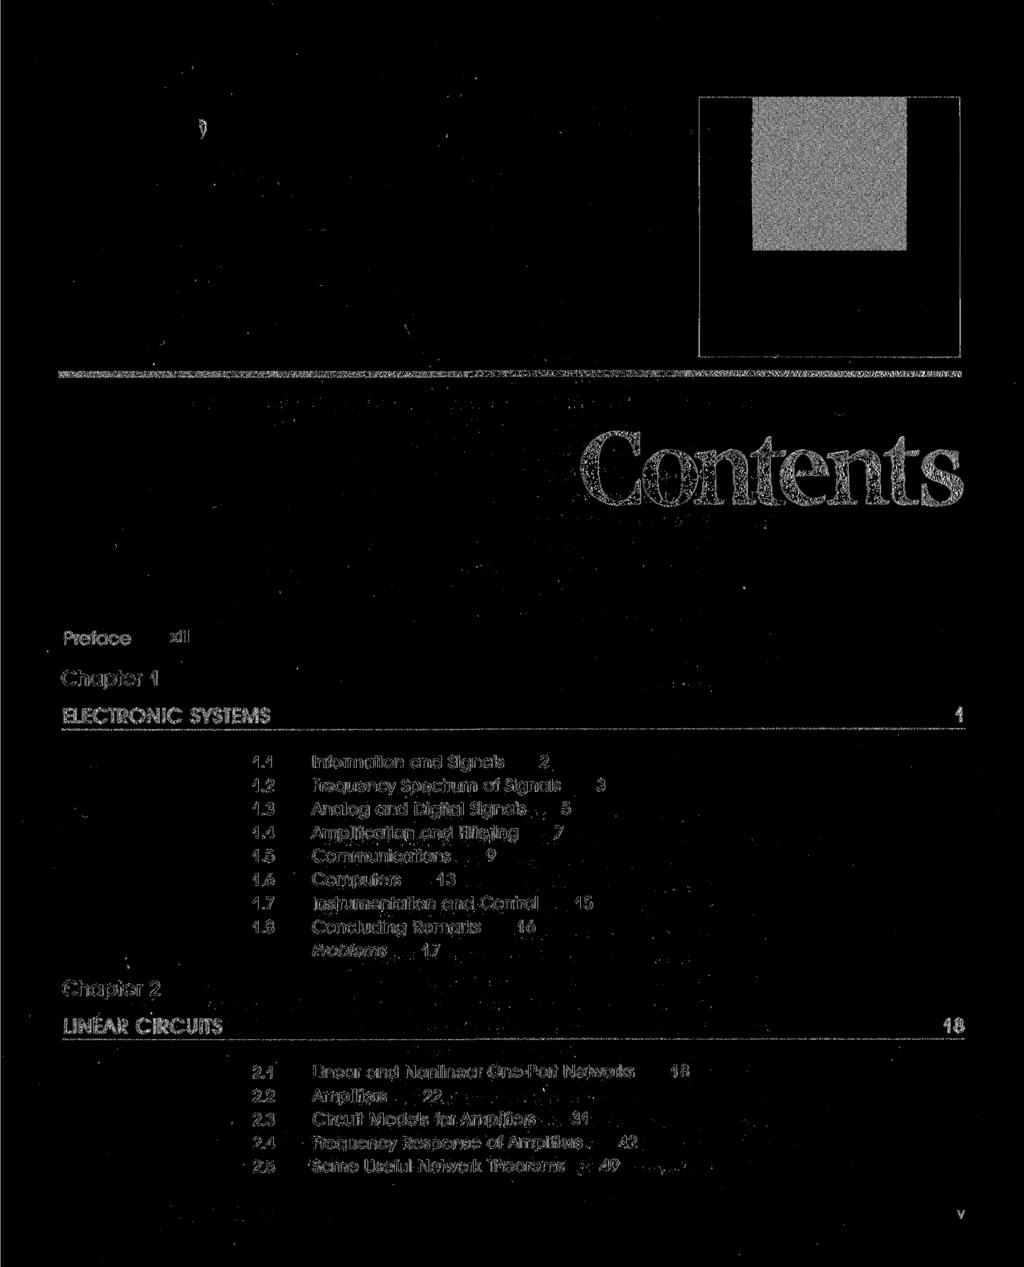 Contents Preface xiii Chapter 1 ELECTRONIC SYSTEMS Chapter 2 1.1 Information and Signals 2 1.2 Frequency Spectrum of Signals '. 1.3 Analog and Digital Signals 5 1.4 Amplification and Filtering 7 1.